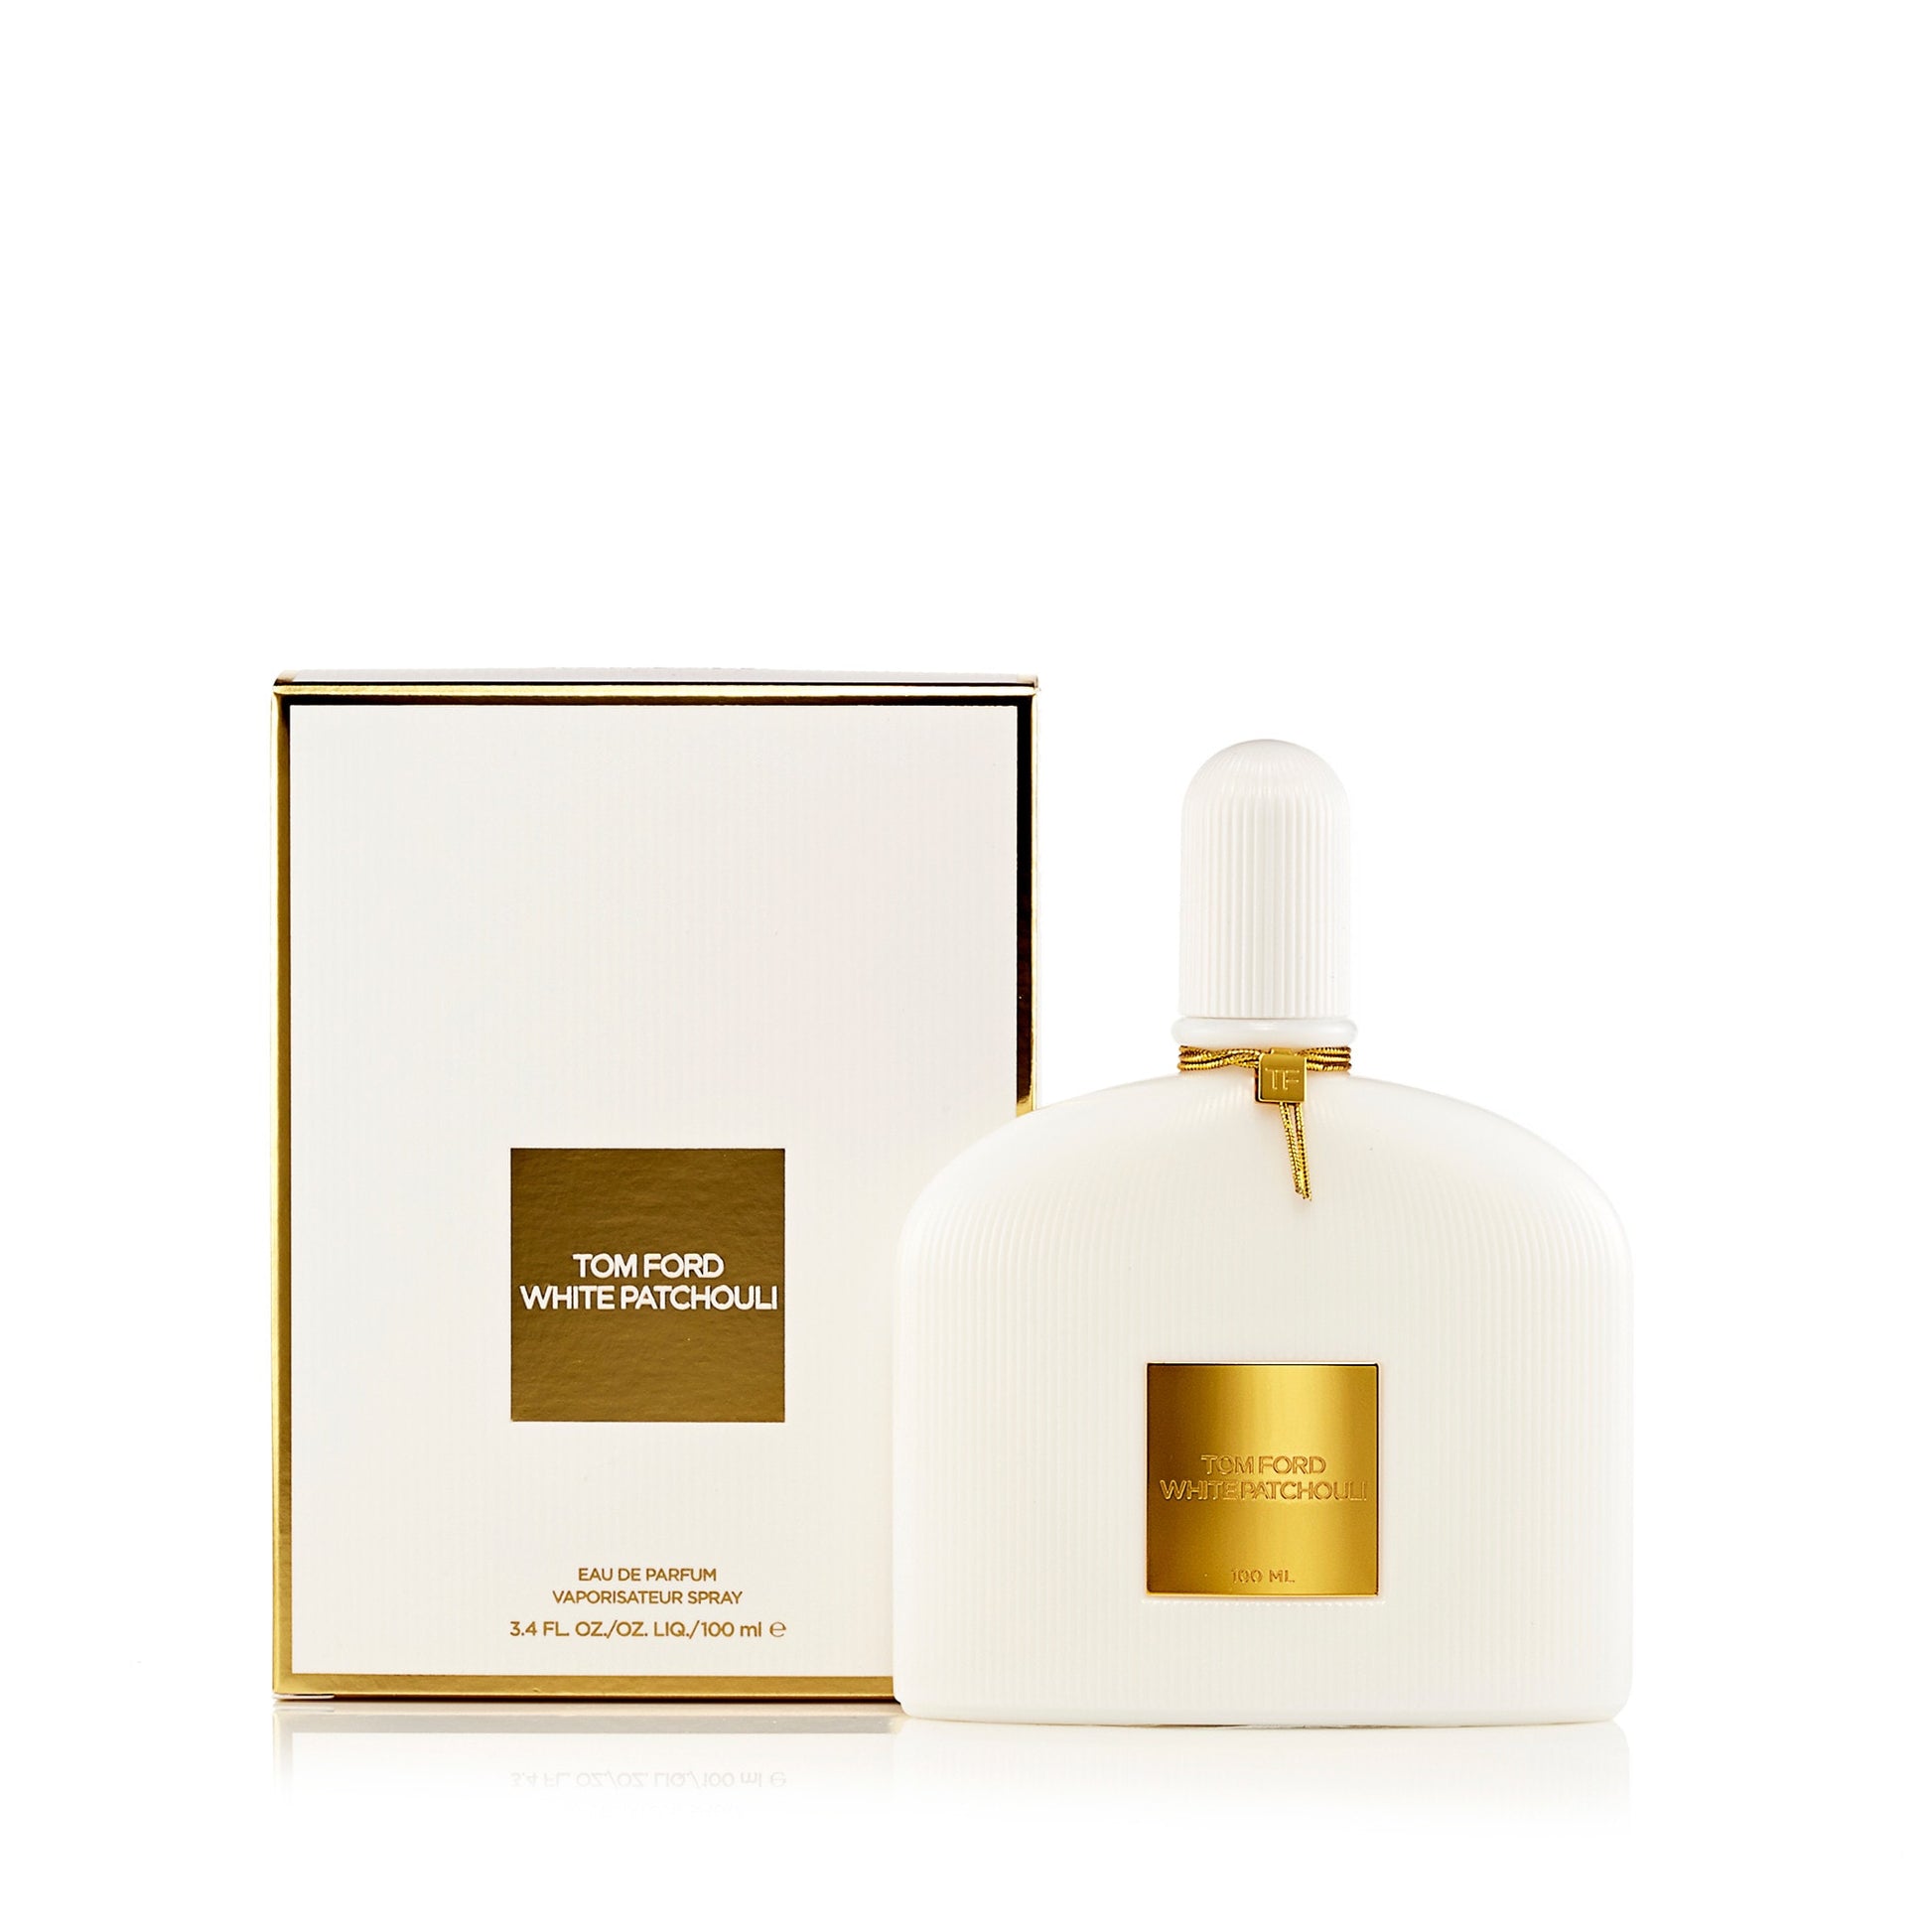 White Patchouli Eau de Parfum Spray for Women and Men by Tom Ford, Product image 1